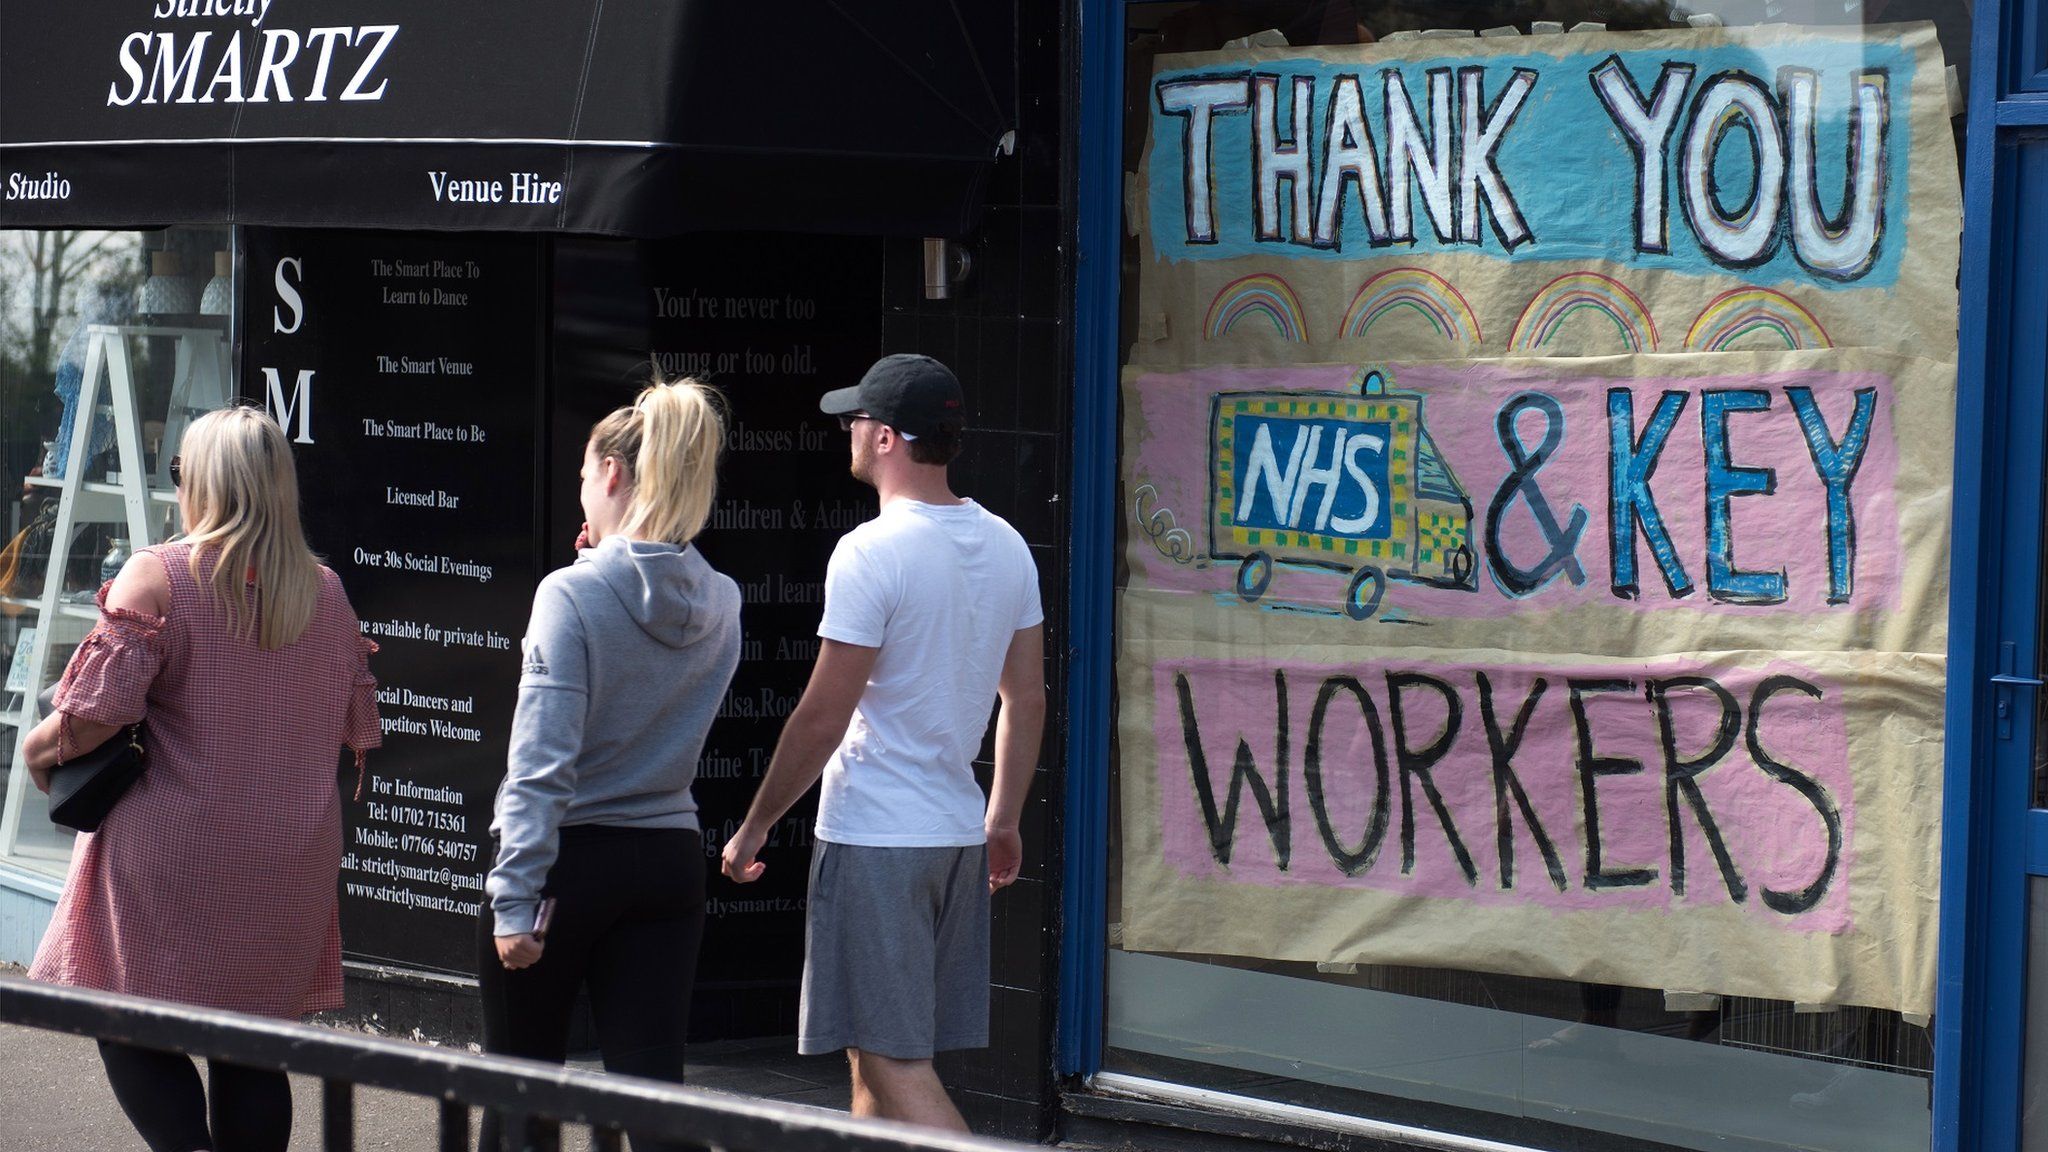 A sign thanking NHS & Key workers